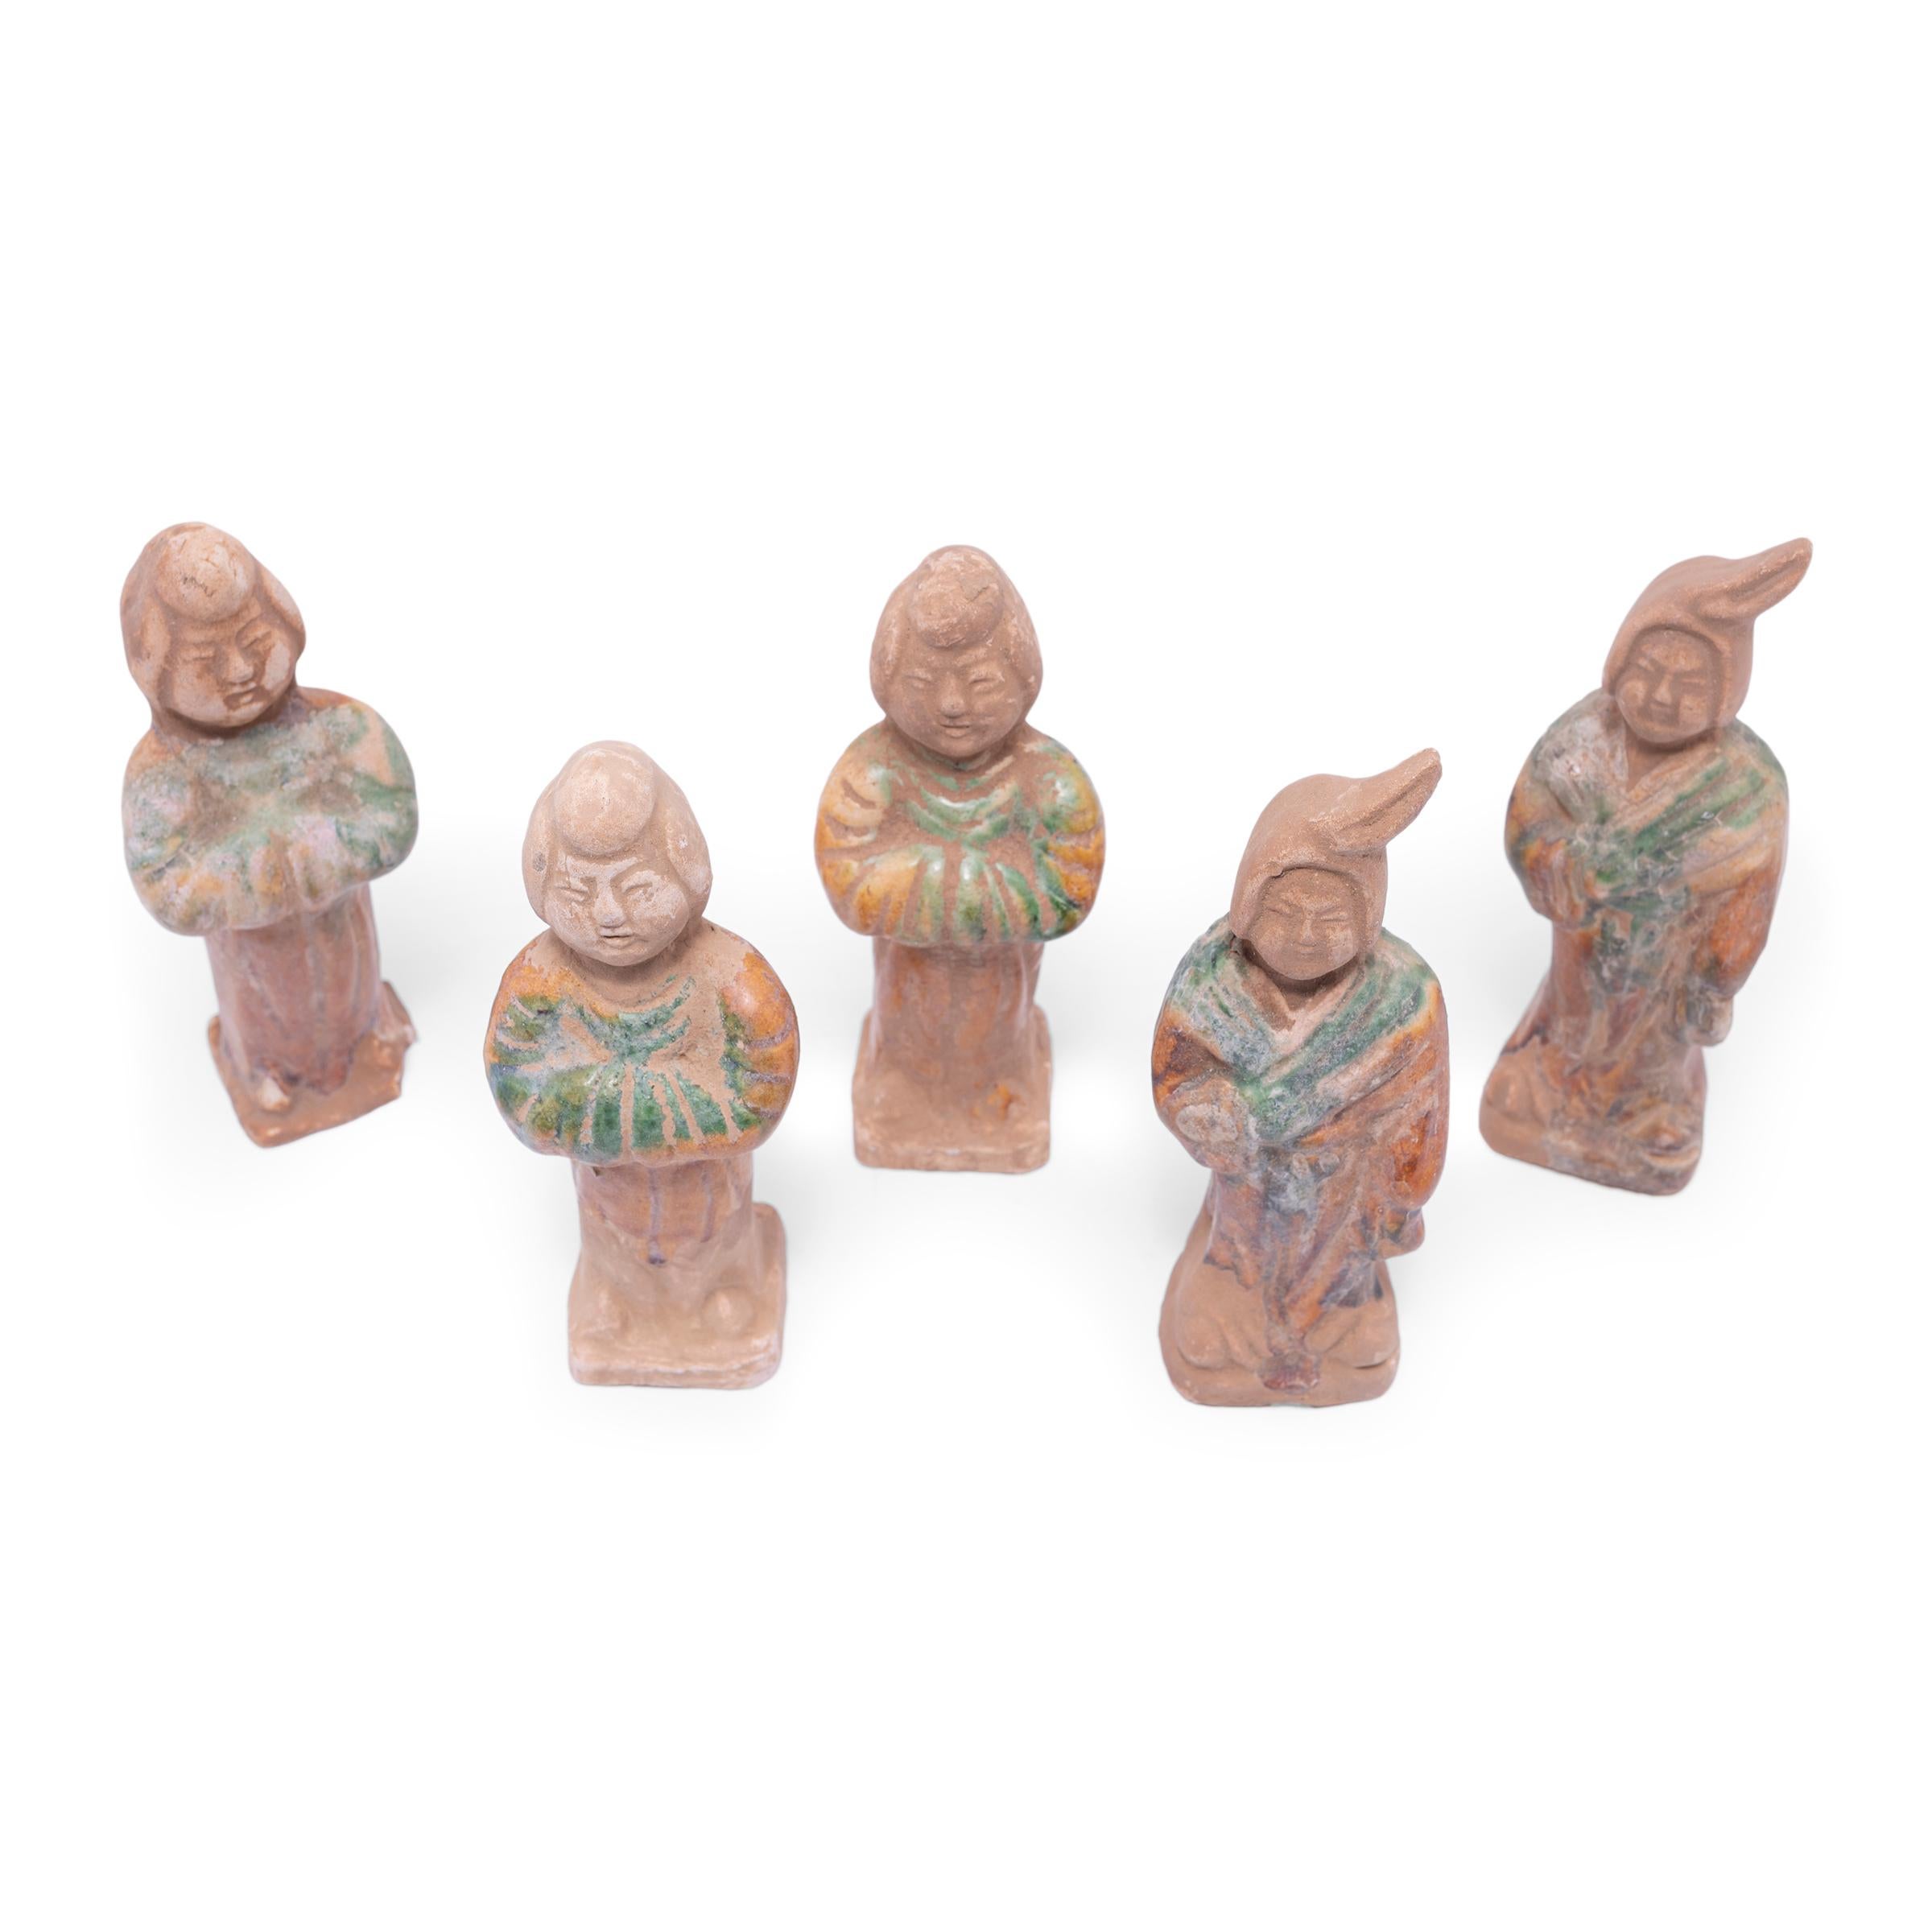 Molded of earthenware, this set of five petite sculptures are a type of centuries-old burial figurine known as míngqì. Such model figures were placed in tombs of individuals with high status to ensure a safe journey to the afterlife. Meant to depict